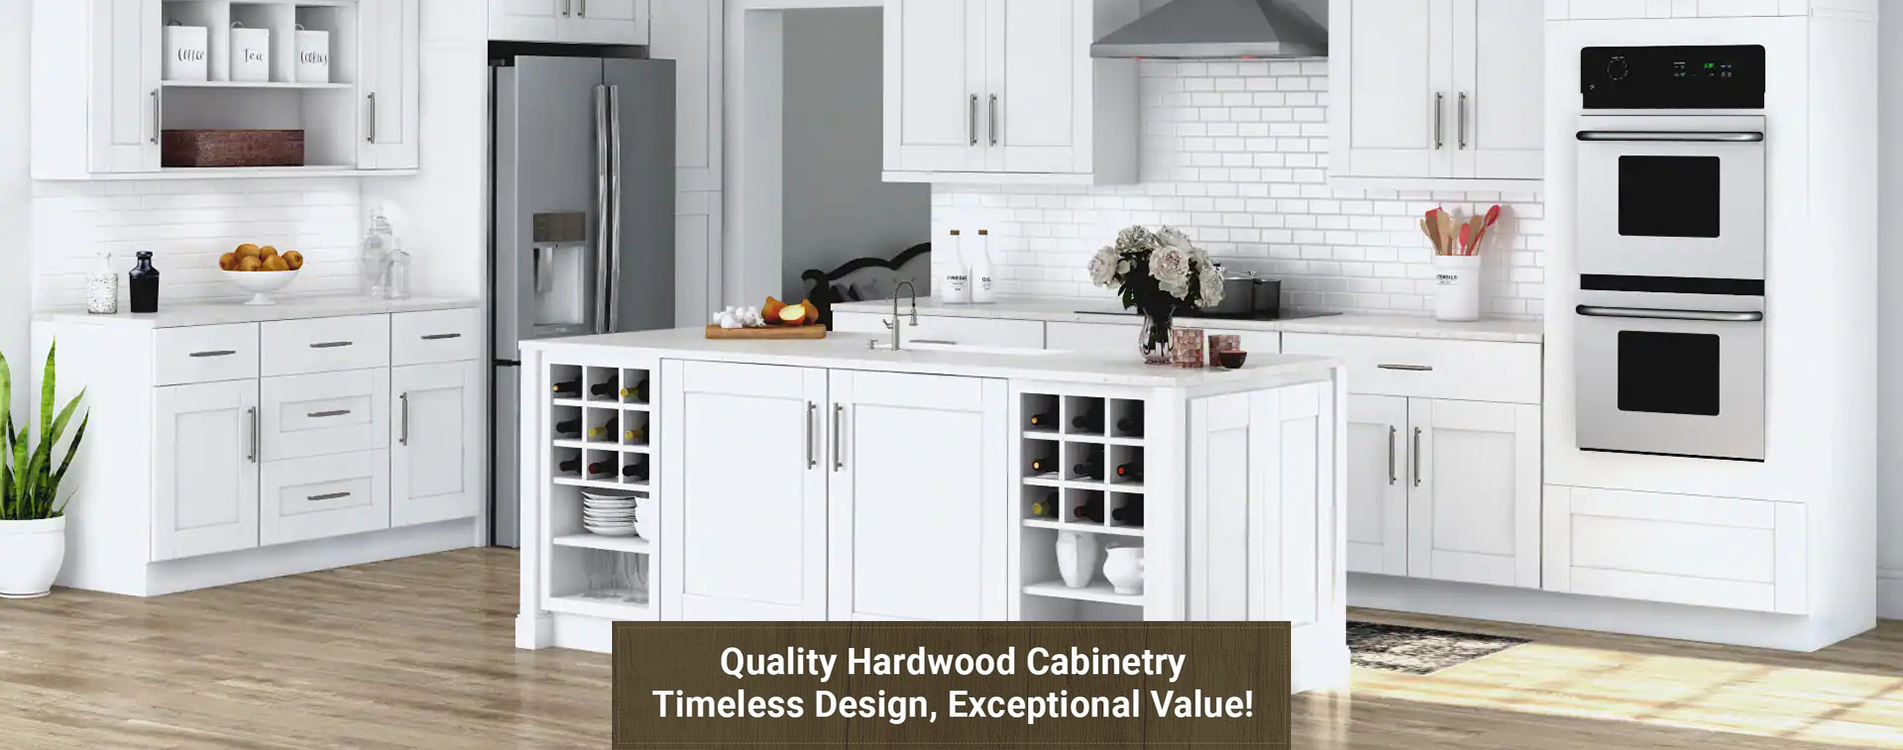 10% Off on all Cabinets